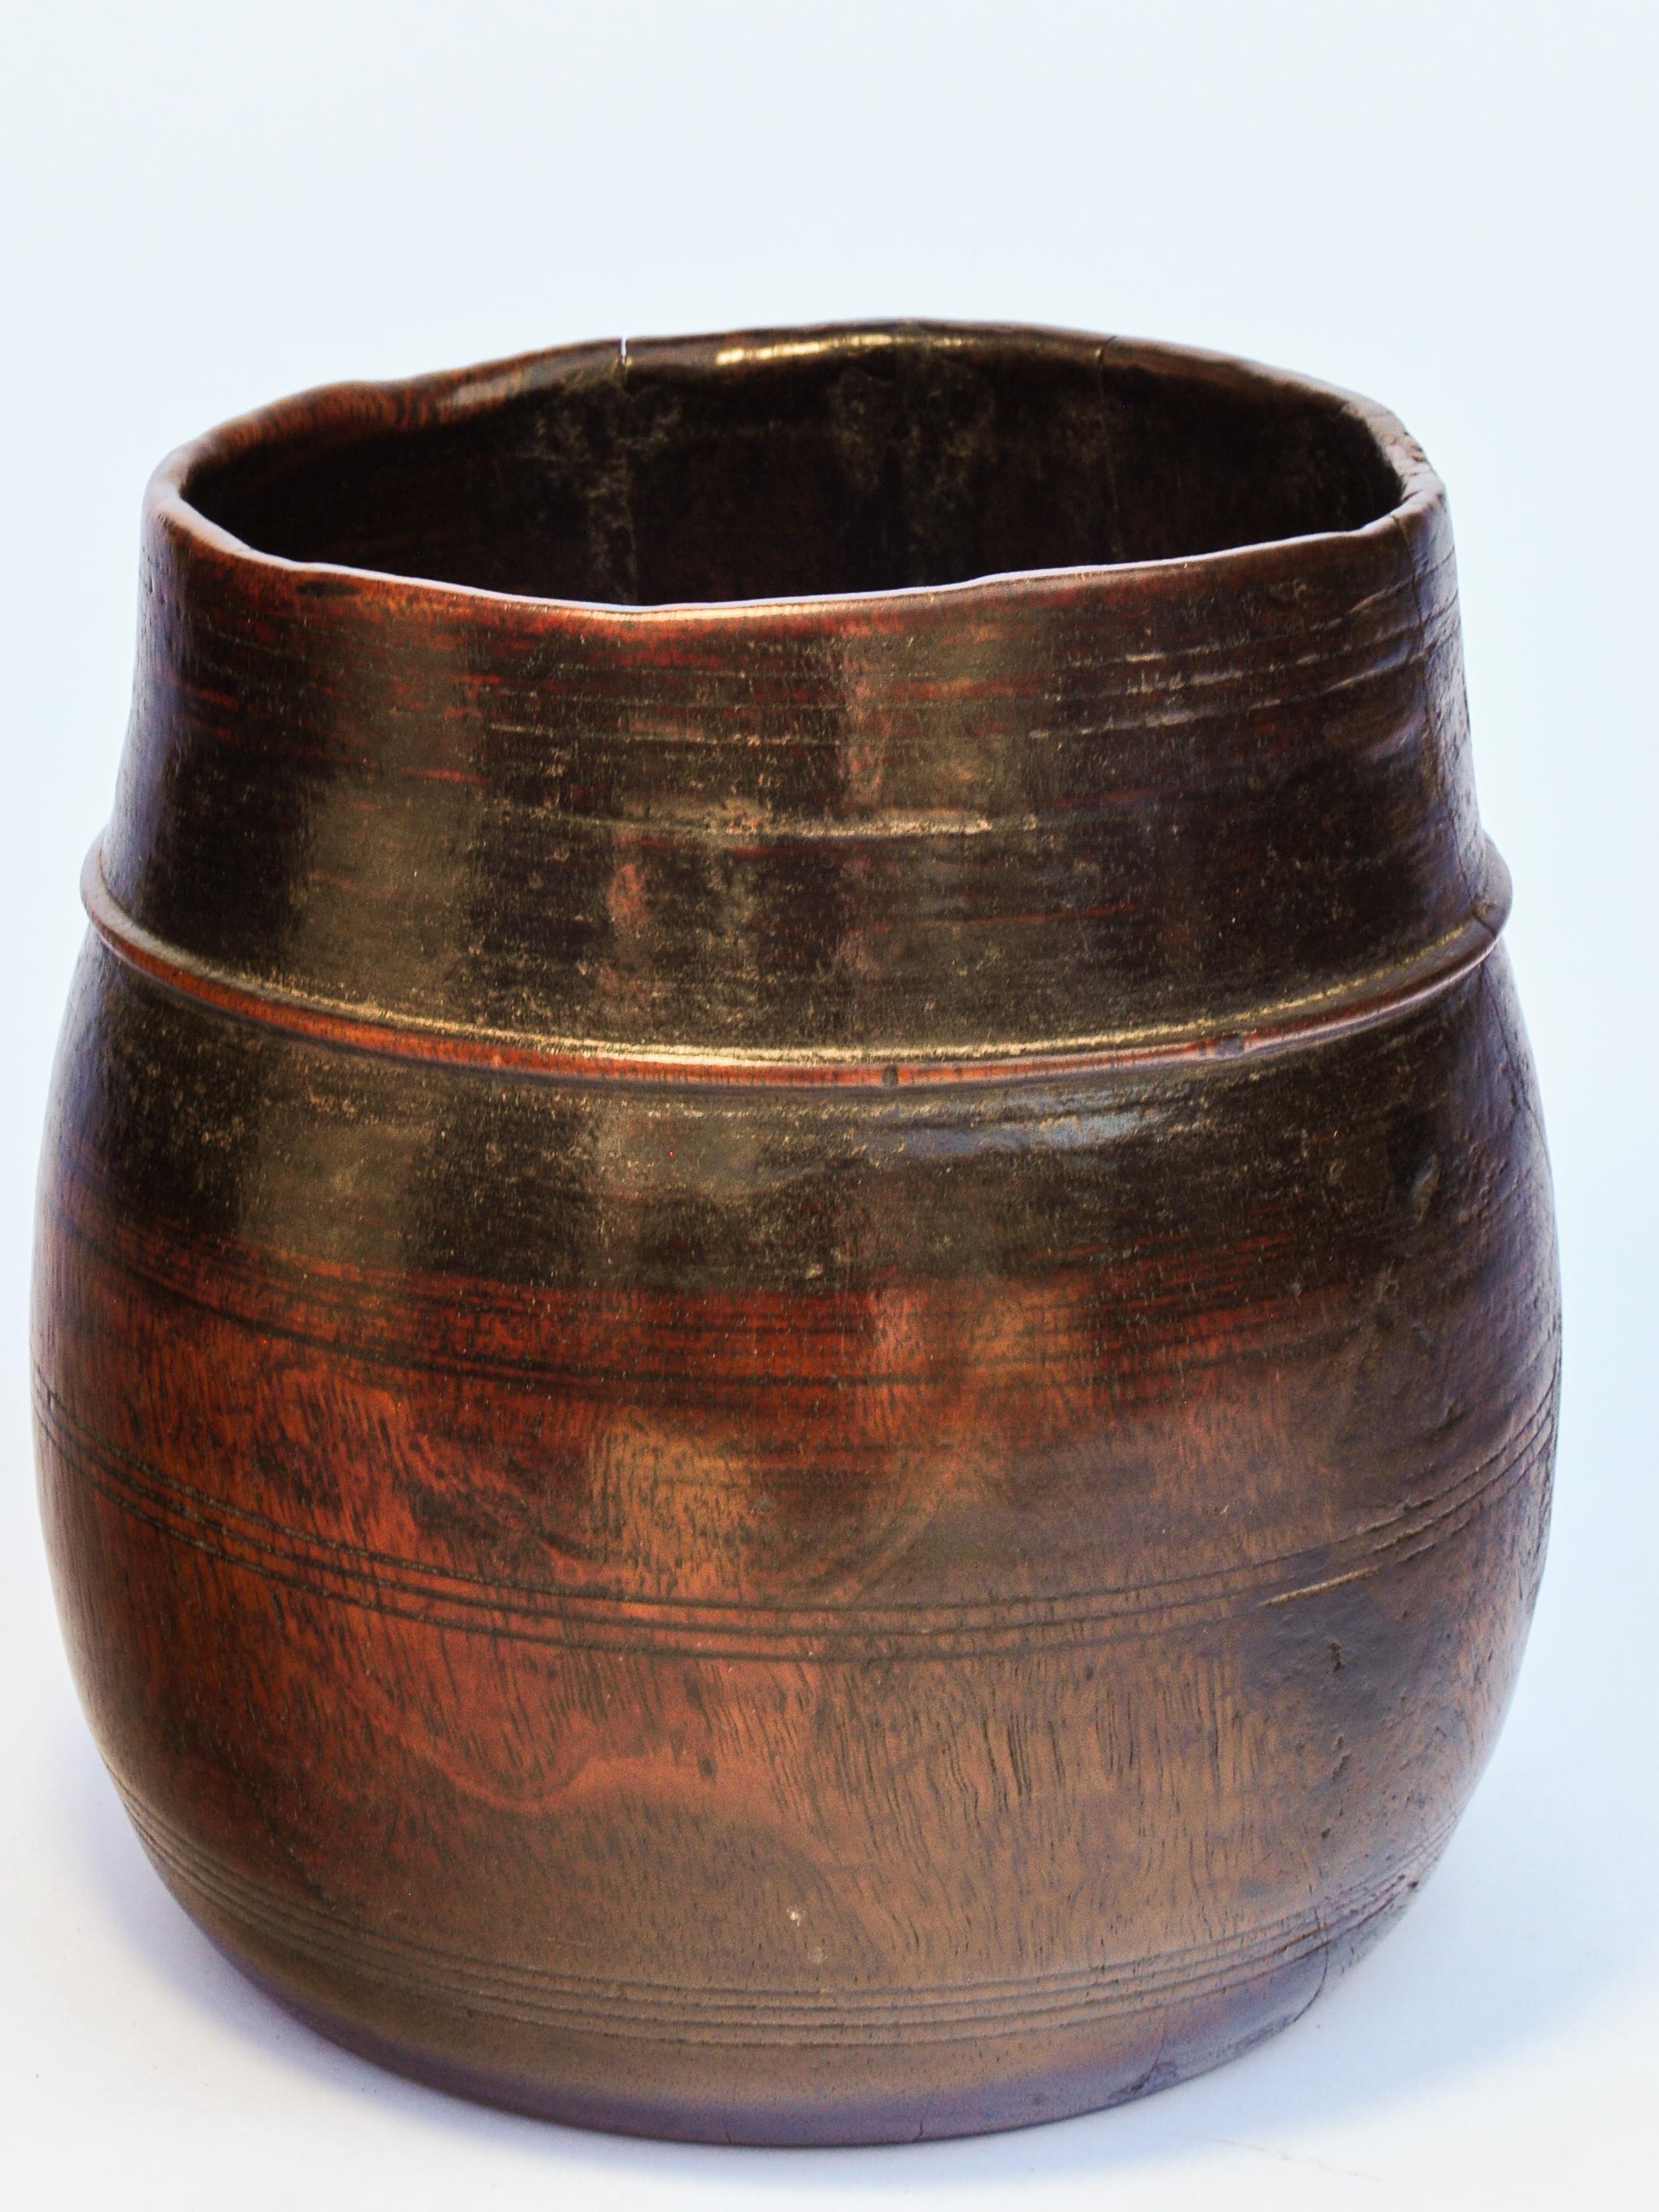 Nepalese Vintage Wooden Grain Measure Pot from the Mountains of Nepal, Mid-20th Century